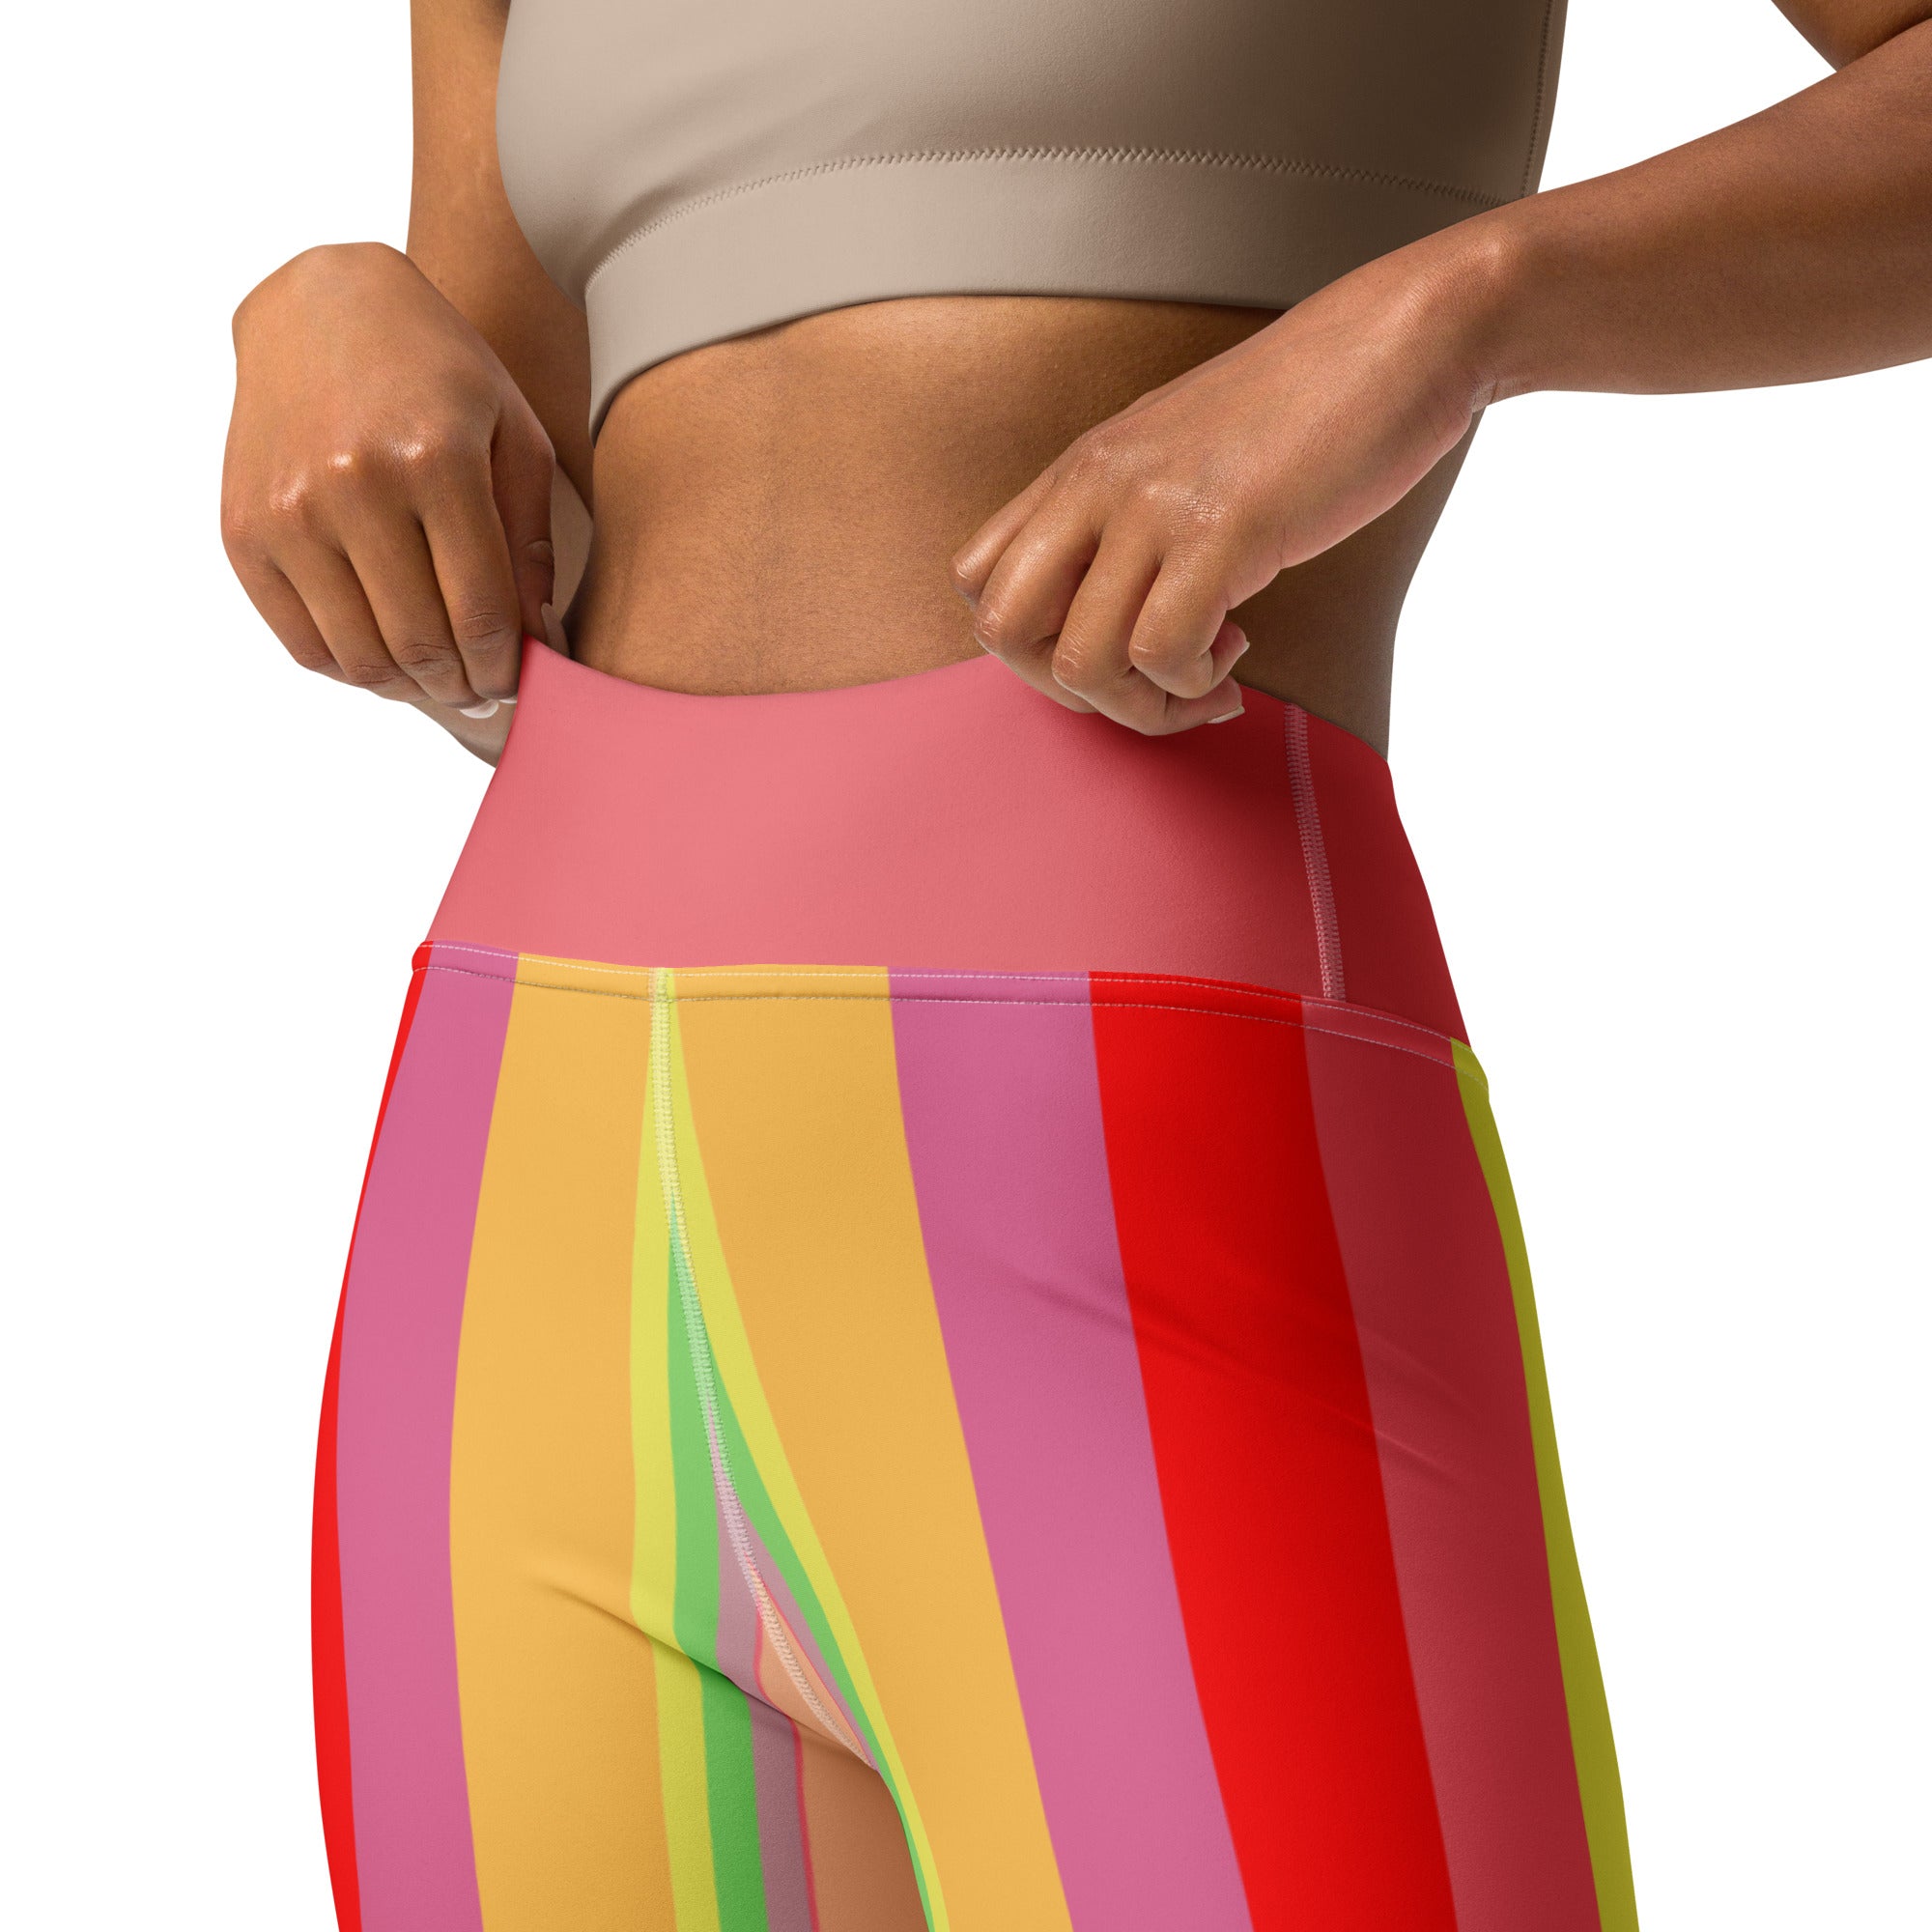 Vibrant Rainbow Cascade Yoga Leggings with a spectrum of colors for an energetic workout.